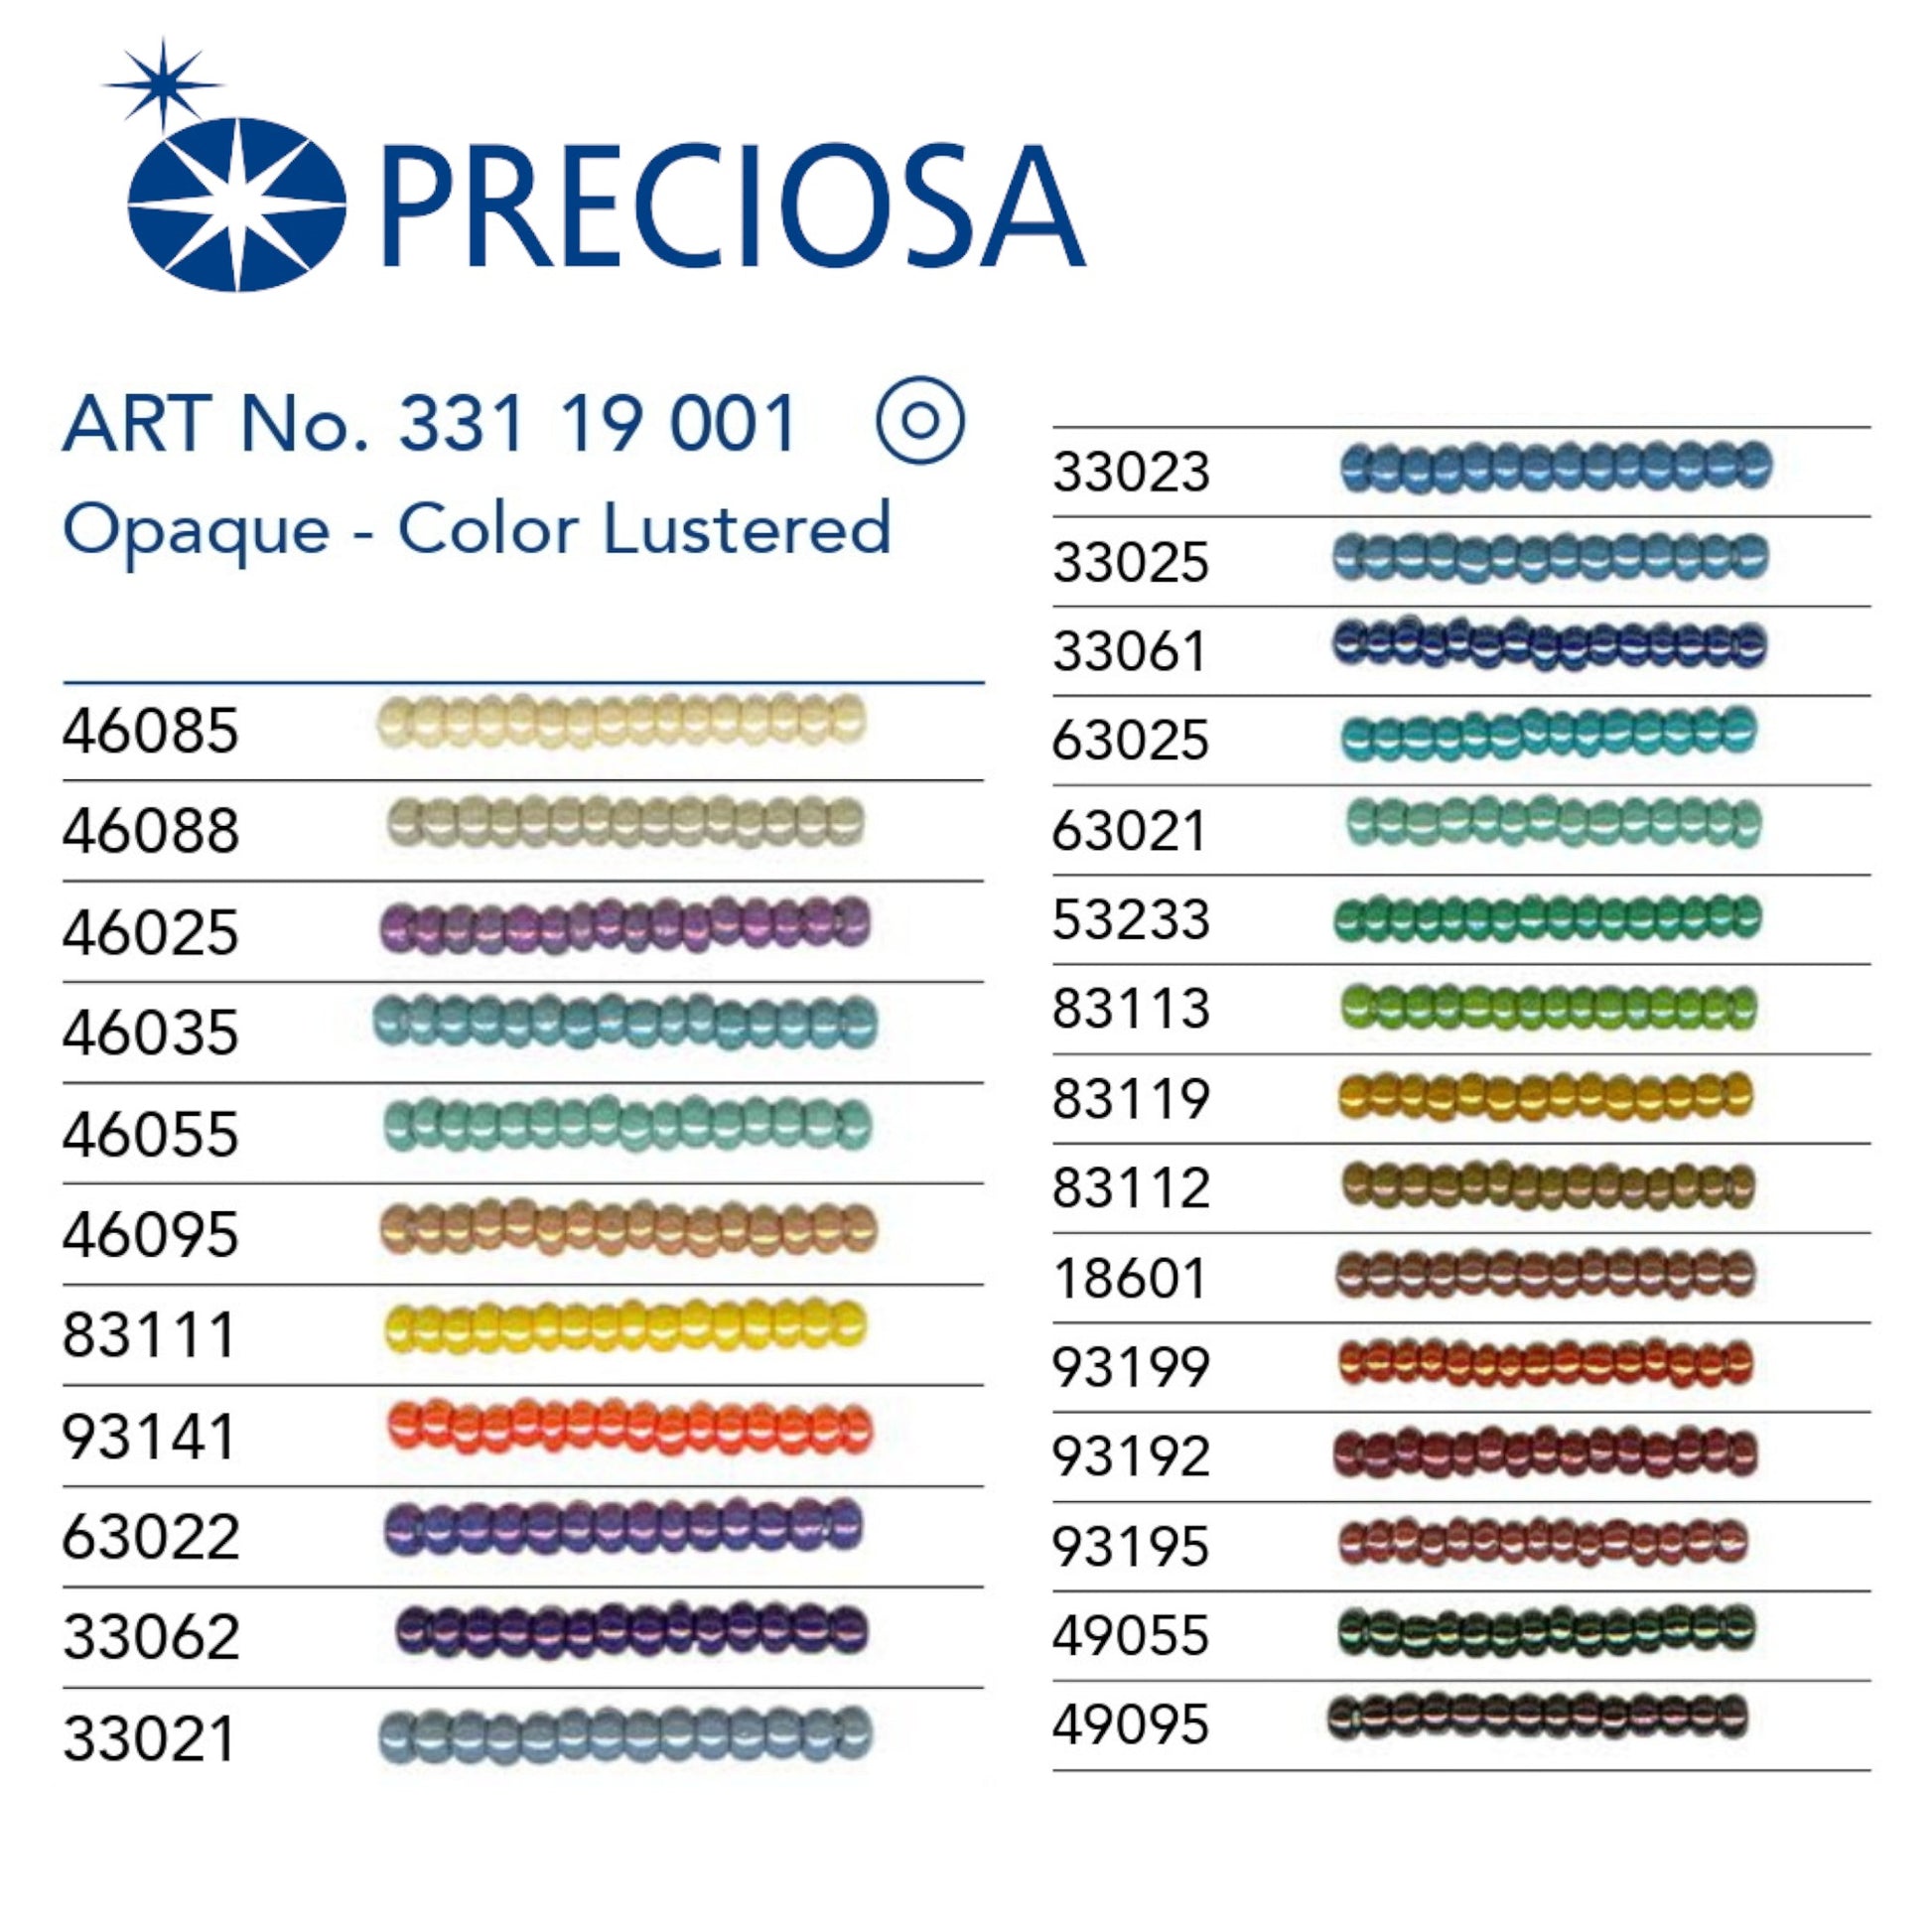 49055 Czech Seed Beads Preciosa Rocailes Opaque - Color Lustered - VadymShop